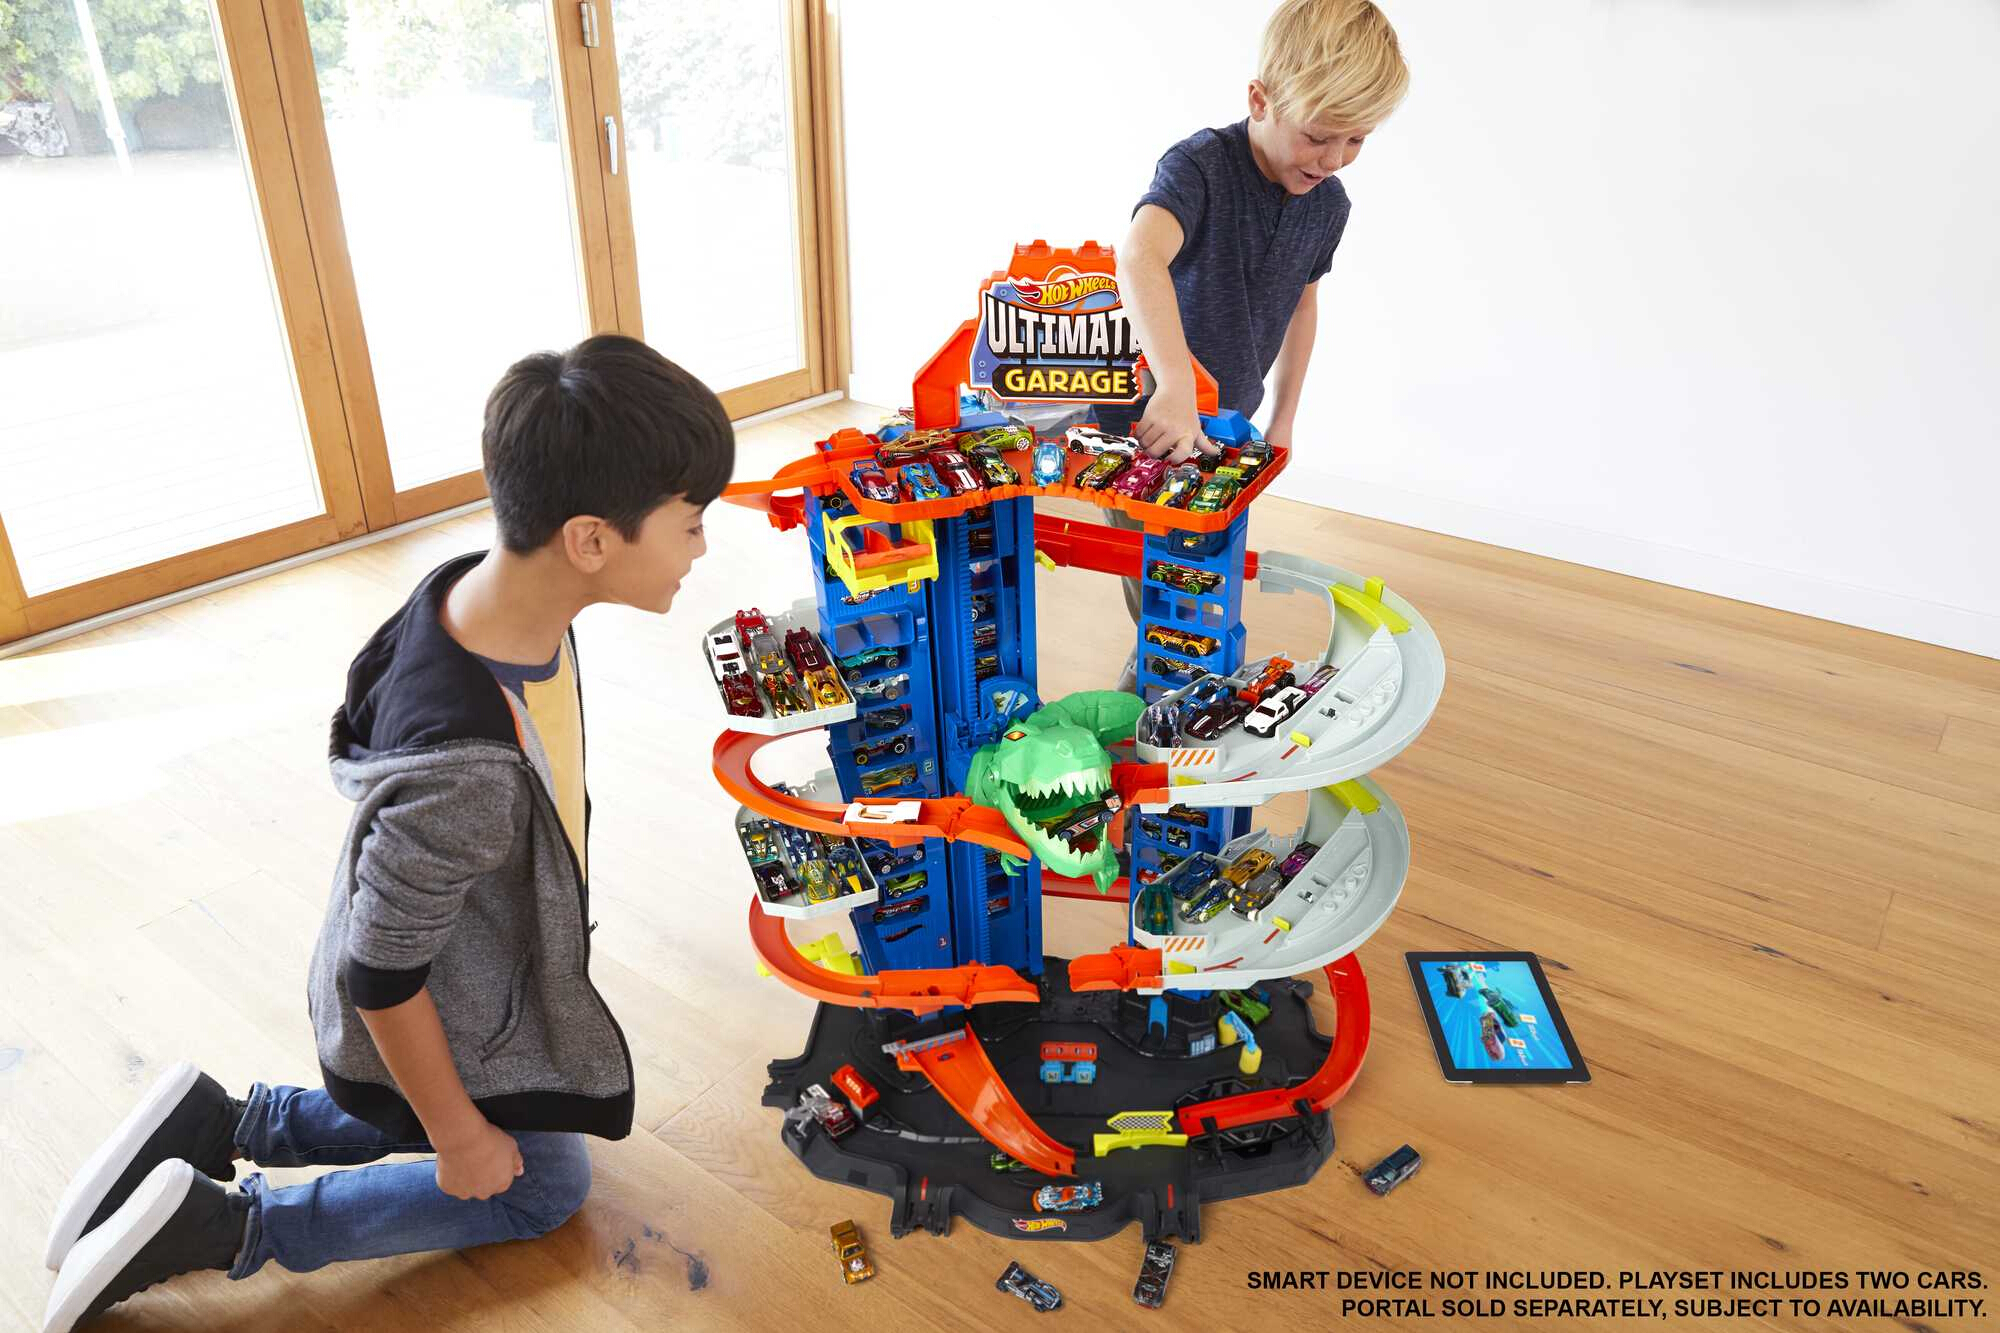 Hot Wheels HW Ultimate Garage Playset with 2 Toy Cars, Stores 100+ 1:64 Scale Vehicles - image 3 of 7